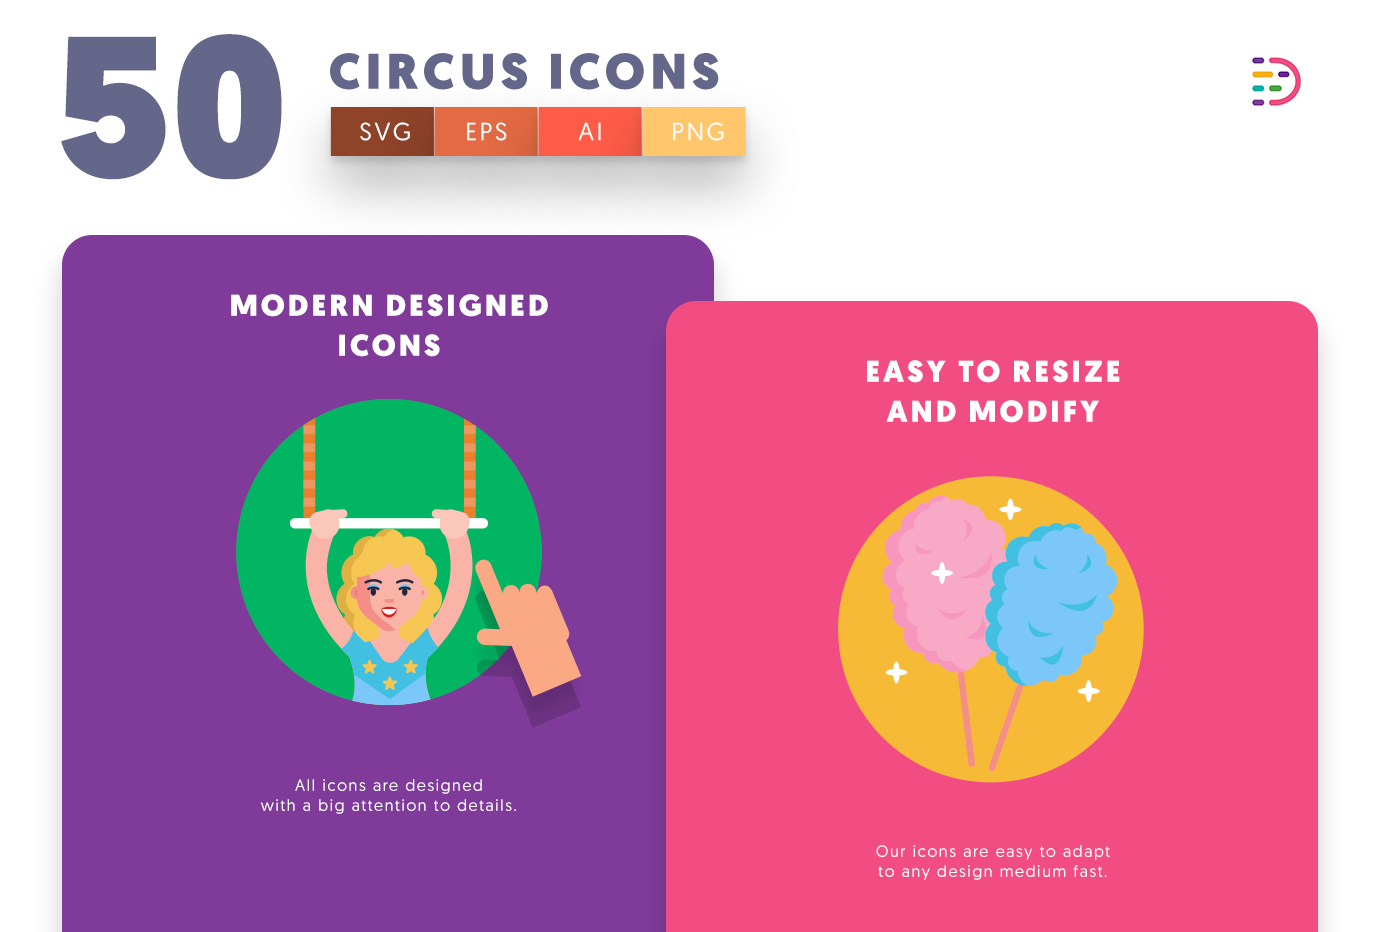 Circus icons png/svg/eps